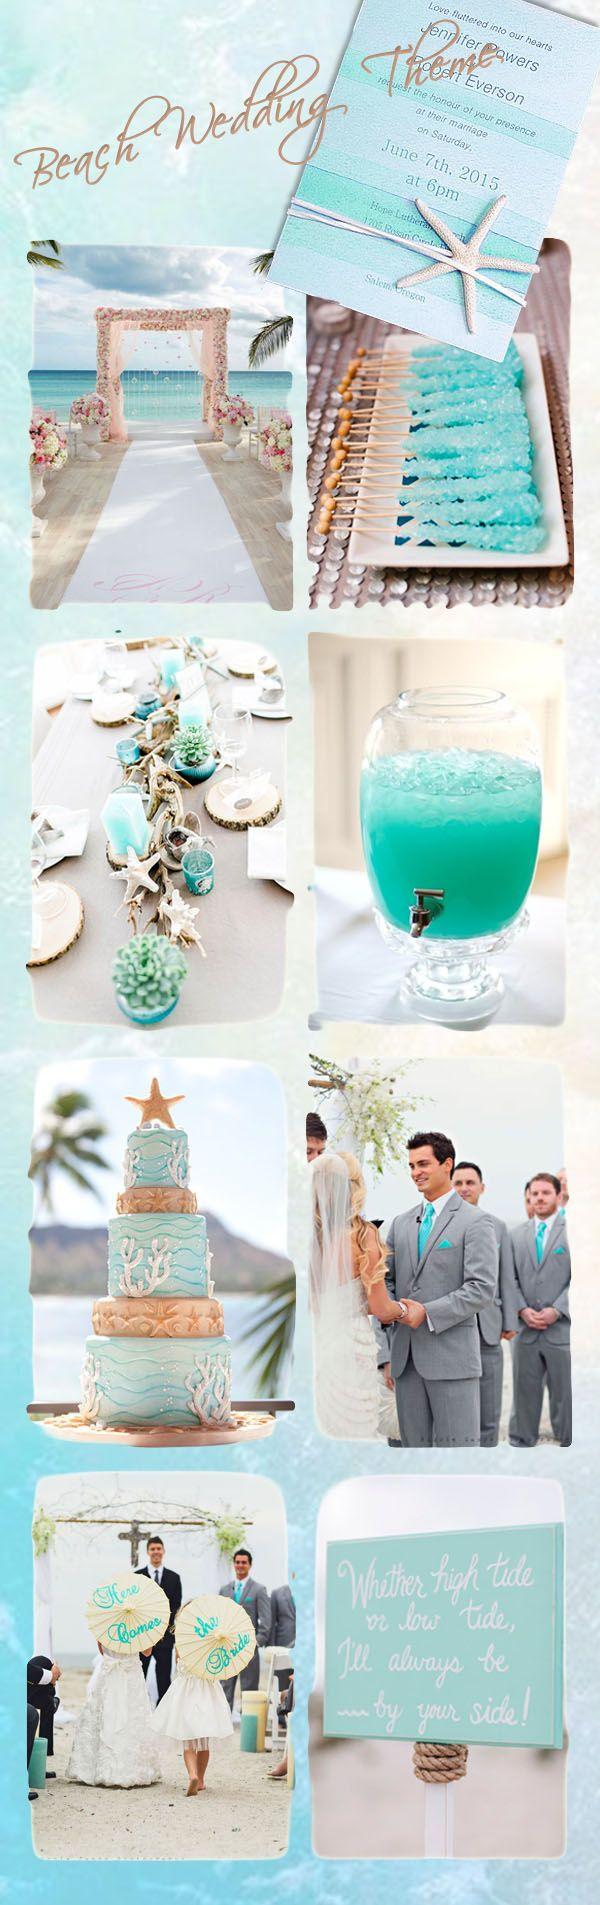 Mariage - Top Ten Wedding Theme Ideas With Beautiful Invitations-Part One